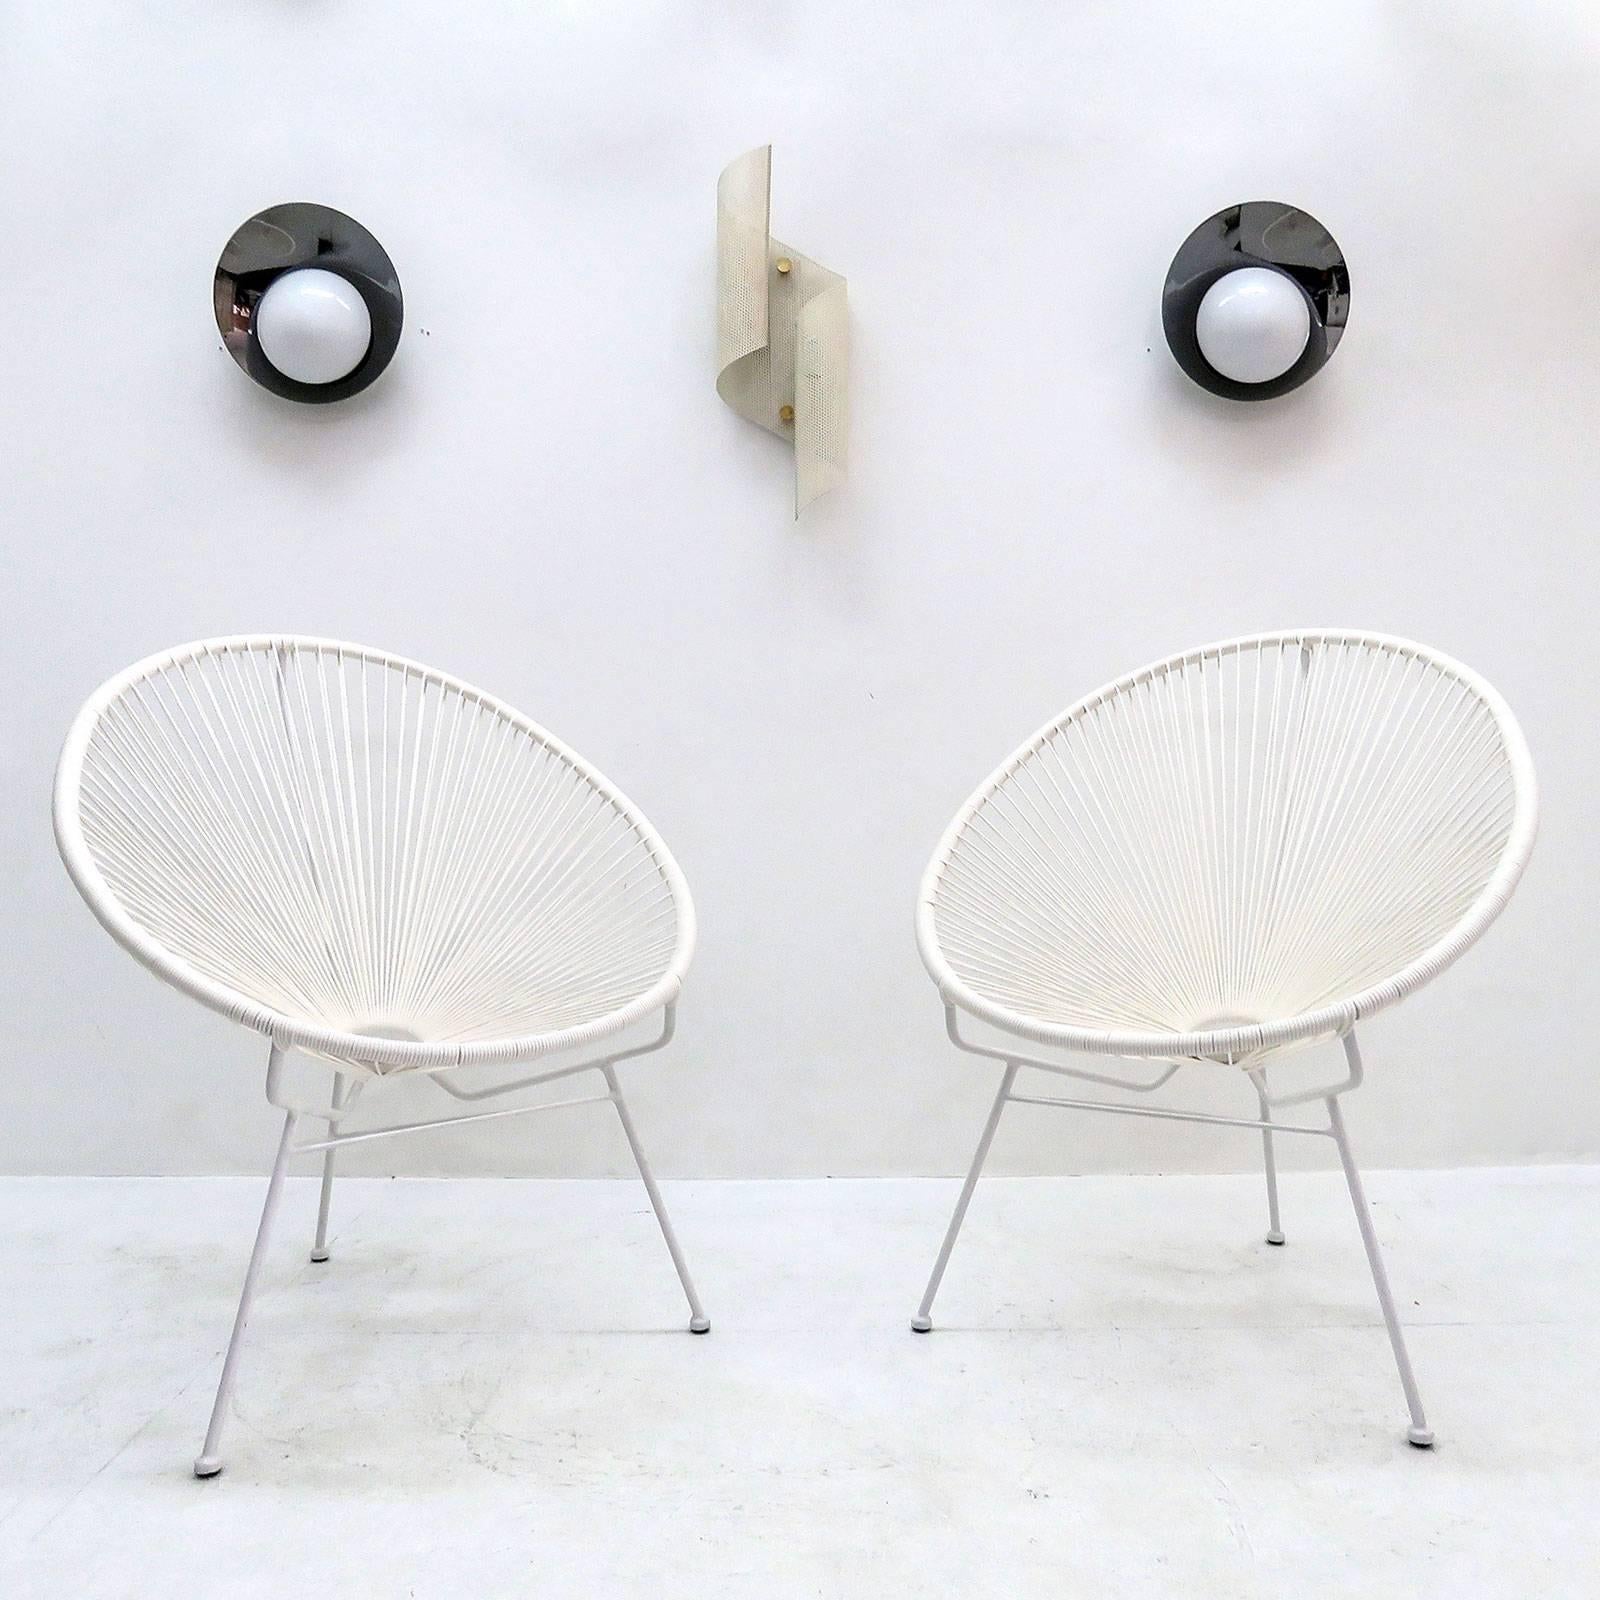 Wonderful pair of white tripod hoop chairs in style of the iconic 1960s Acapulco chair, with white powder coated metal frame and Polyethylene webbing, can be used indoors or outdoors.